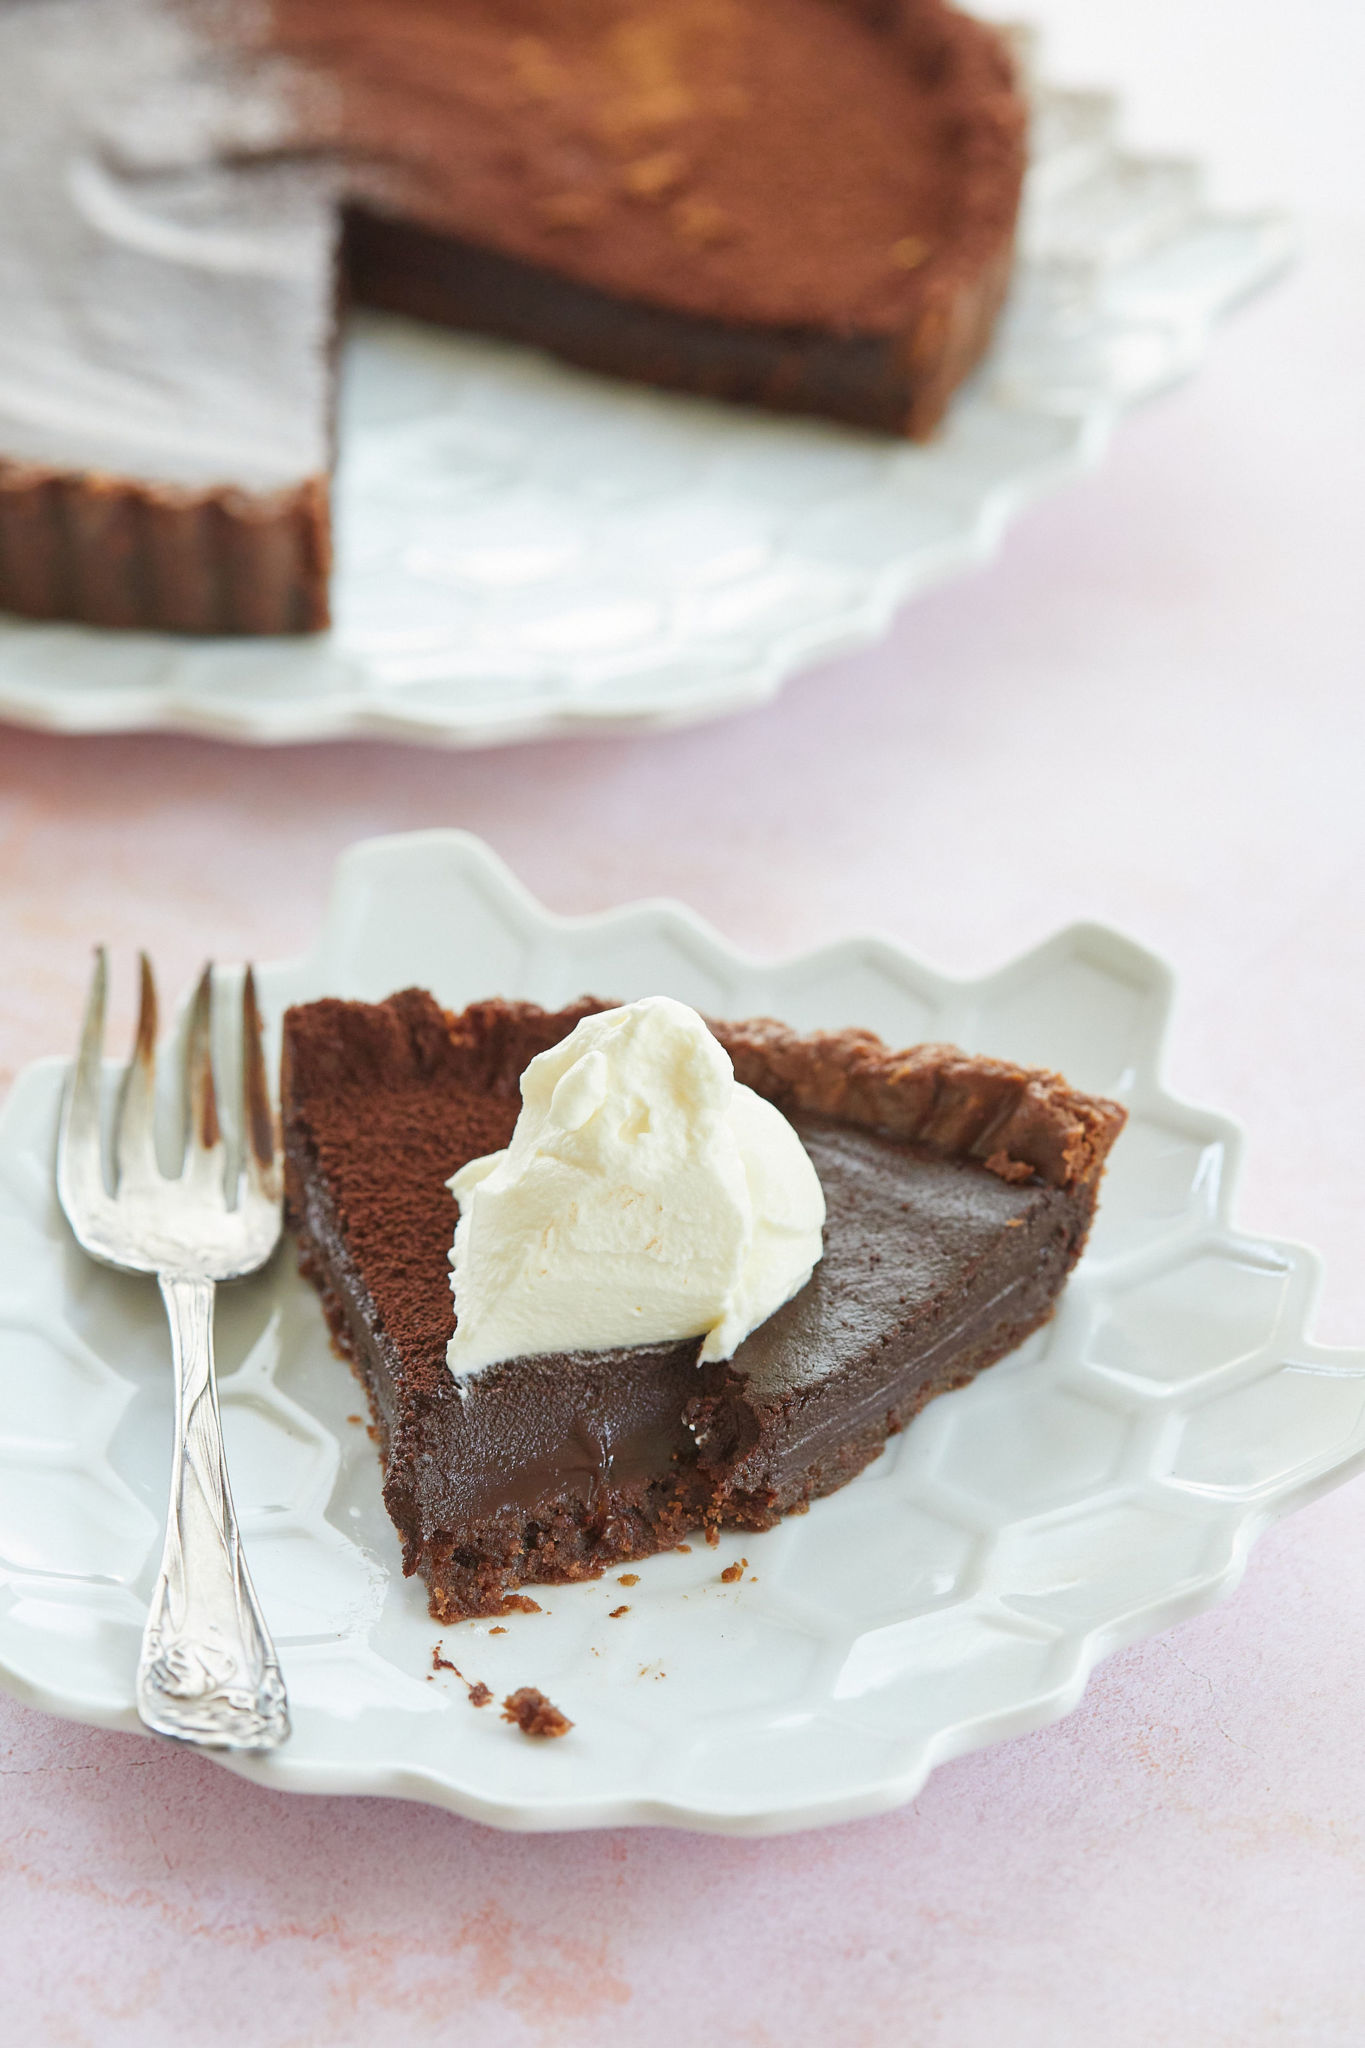 A close of up of the interior of my sinful chocolate tart recipe topped with whipped cream.